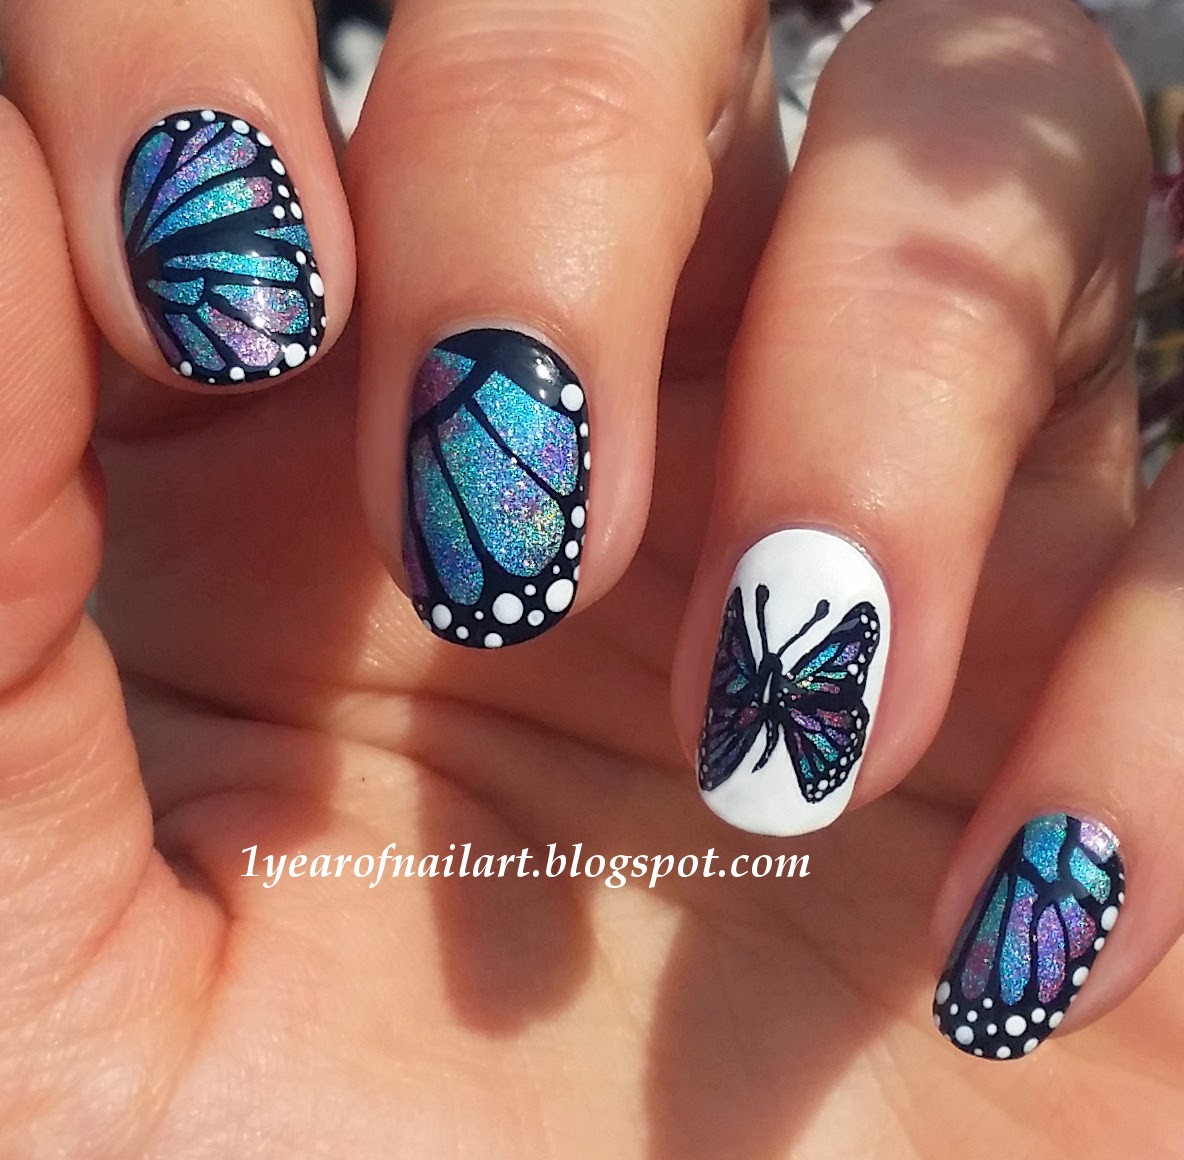 Butterfly Nail Art Designs
 365 days of nail art Butterfly nails